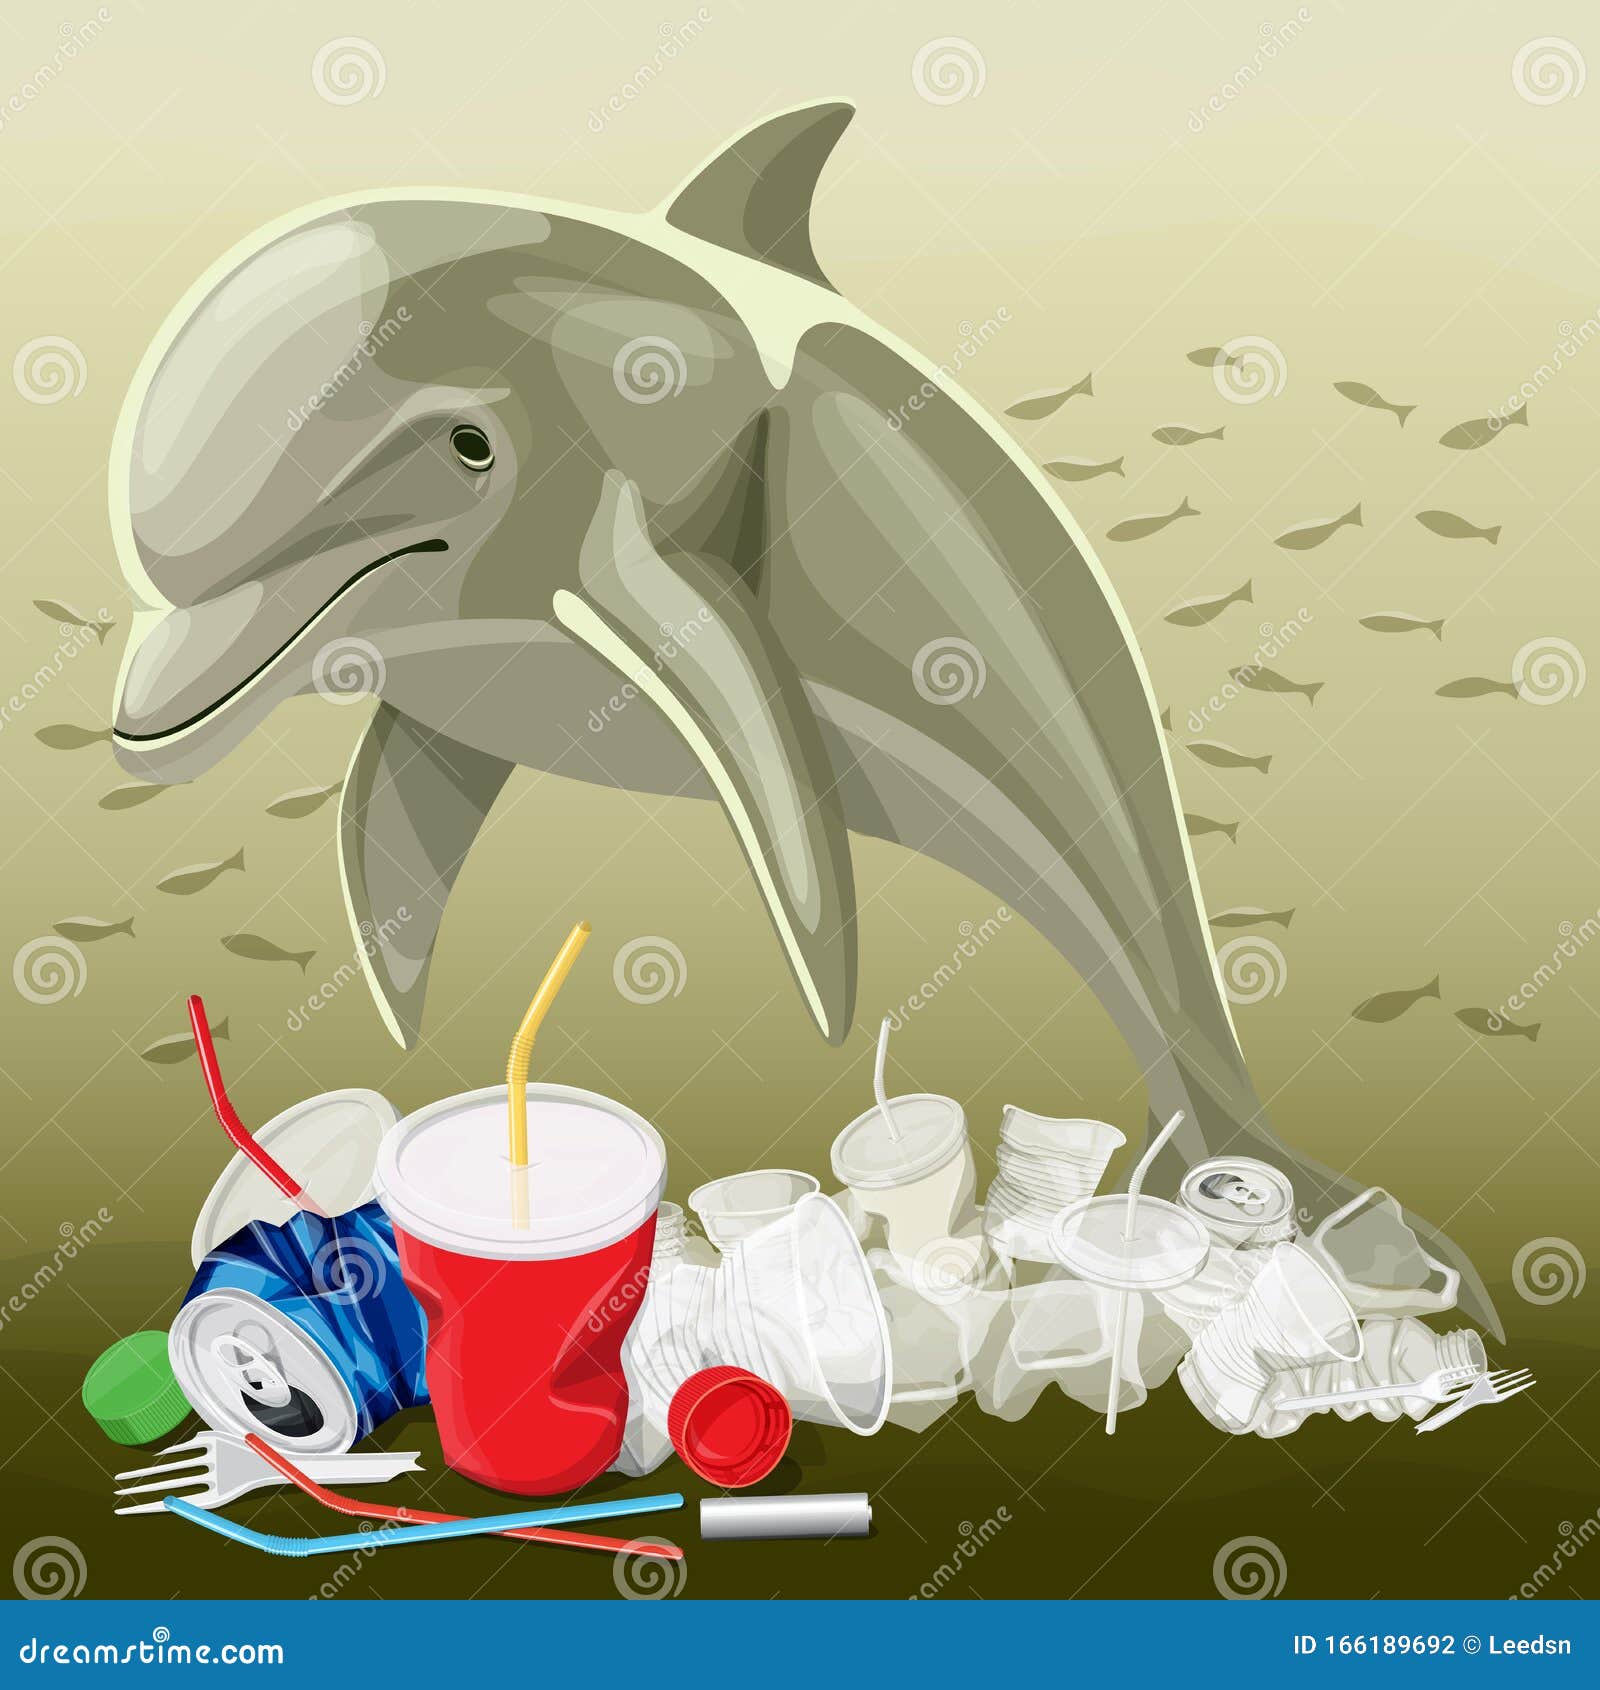 Environment Pollution Illustration and Dolphin Stock Vector ...